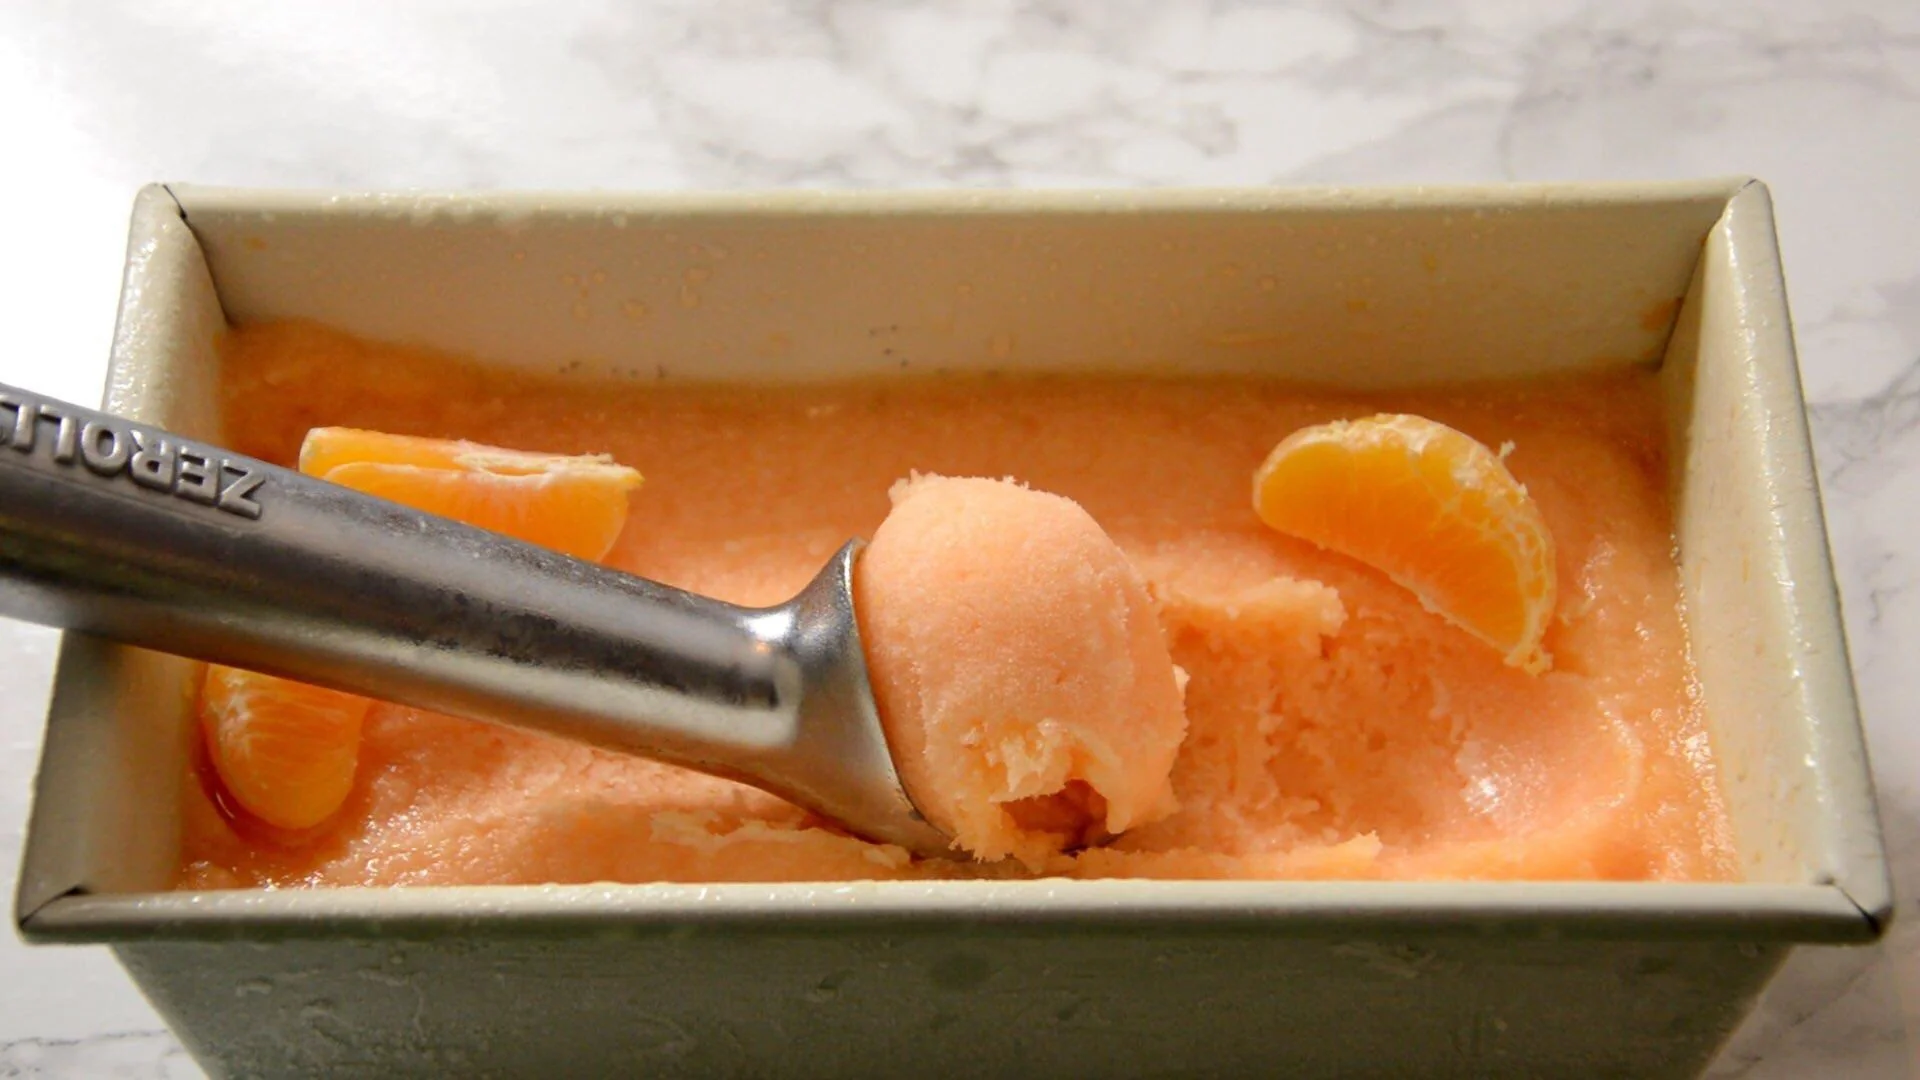 How To Make Orange Sorbet Without An Ice Cream Maker